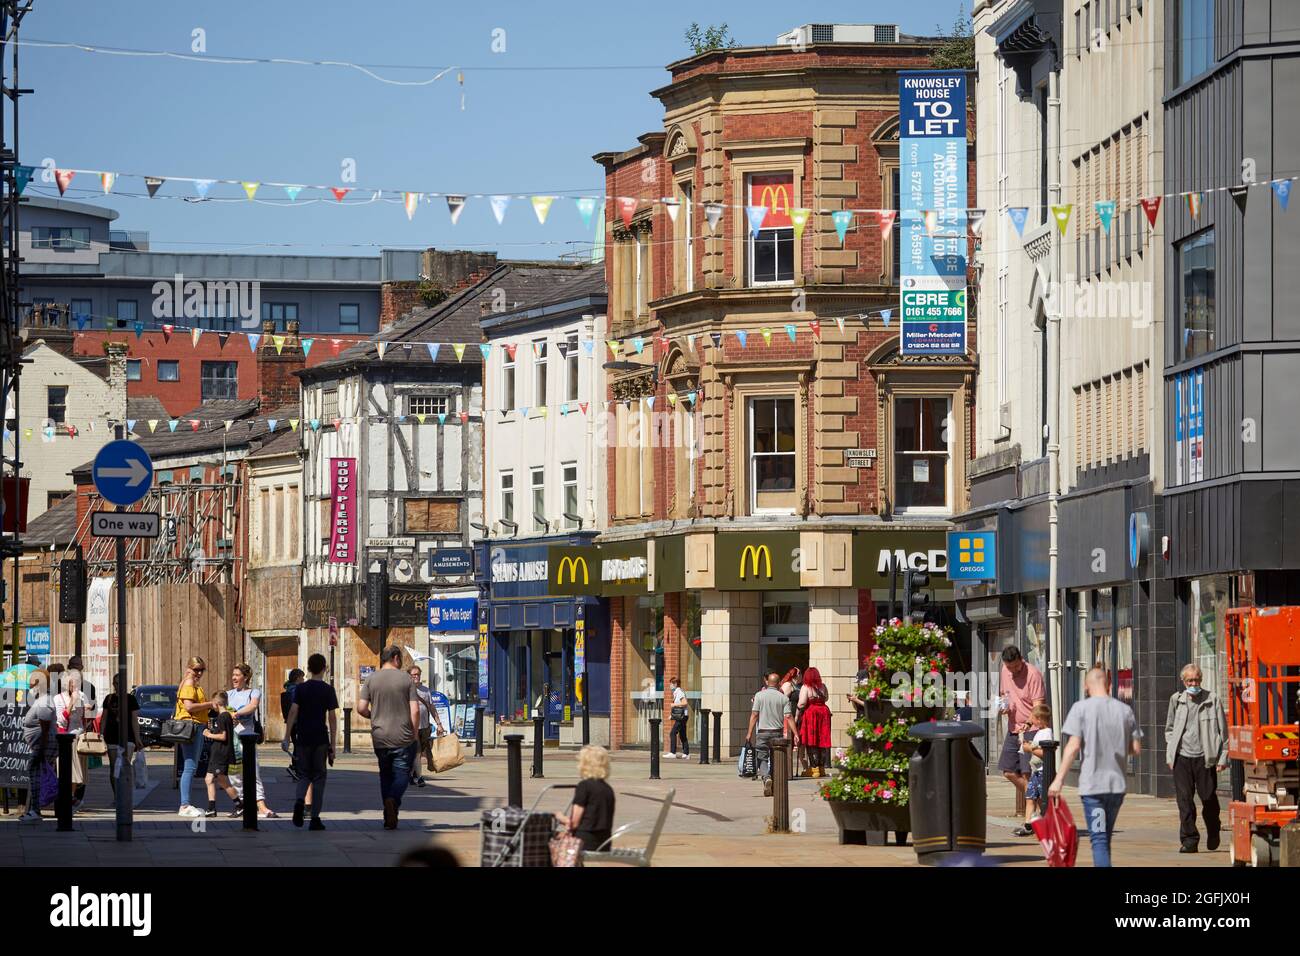 Town Centre Bolton, Lancashire, Deansgate pedestrianised shopping area Stock Photo